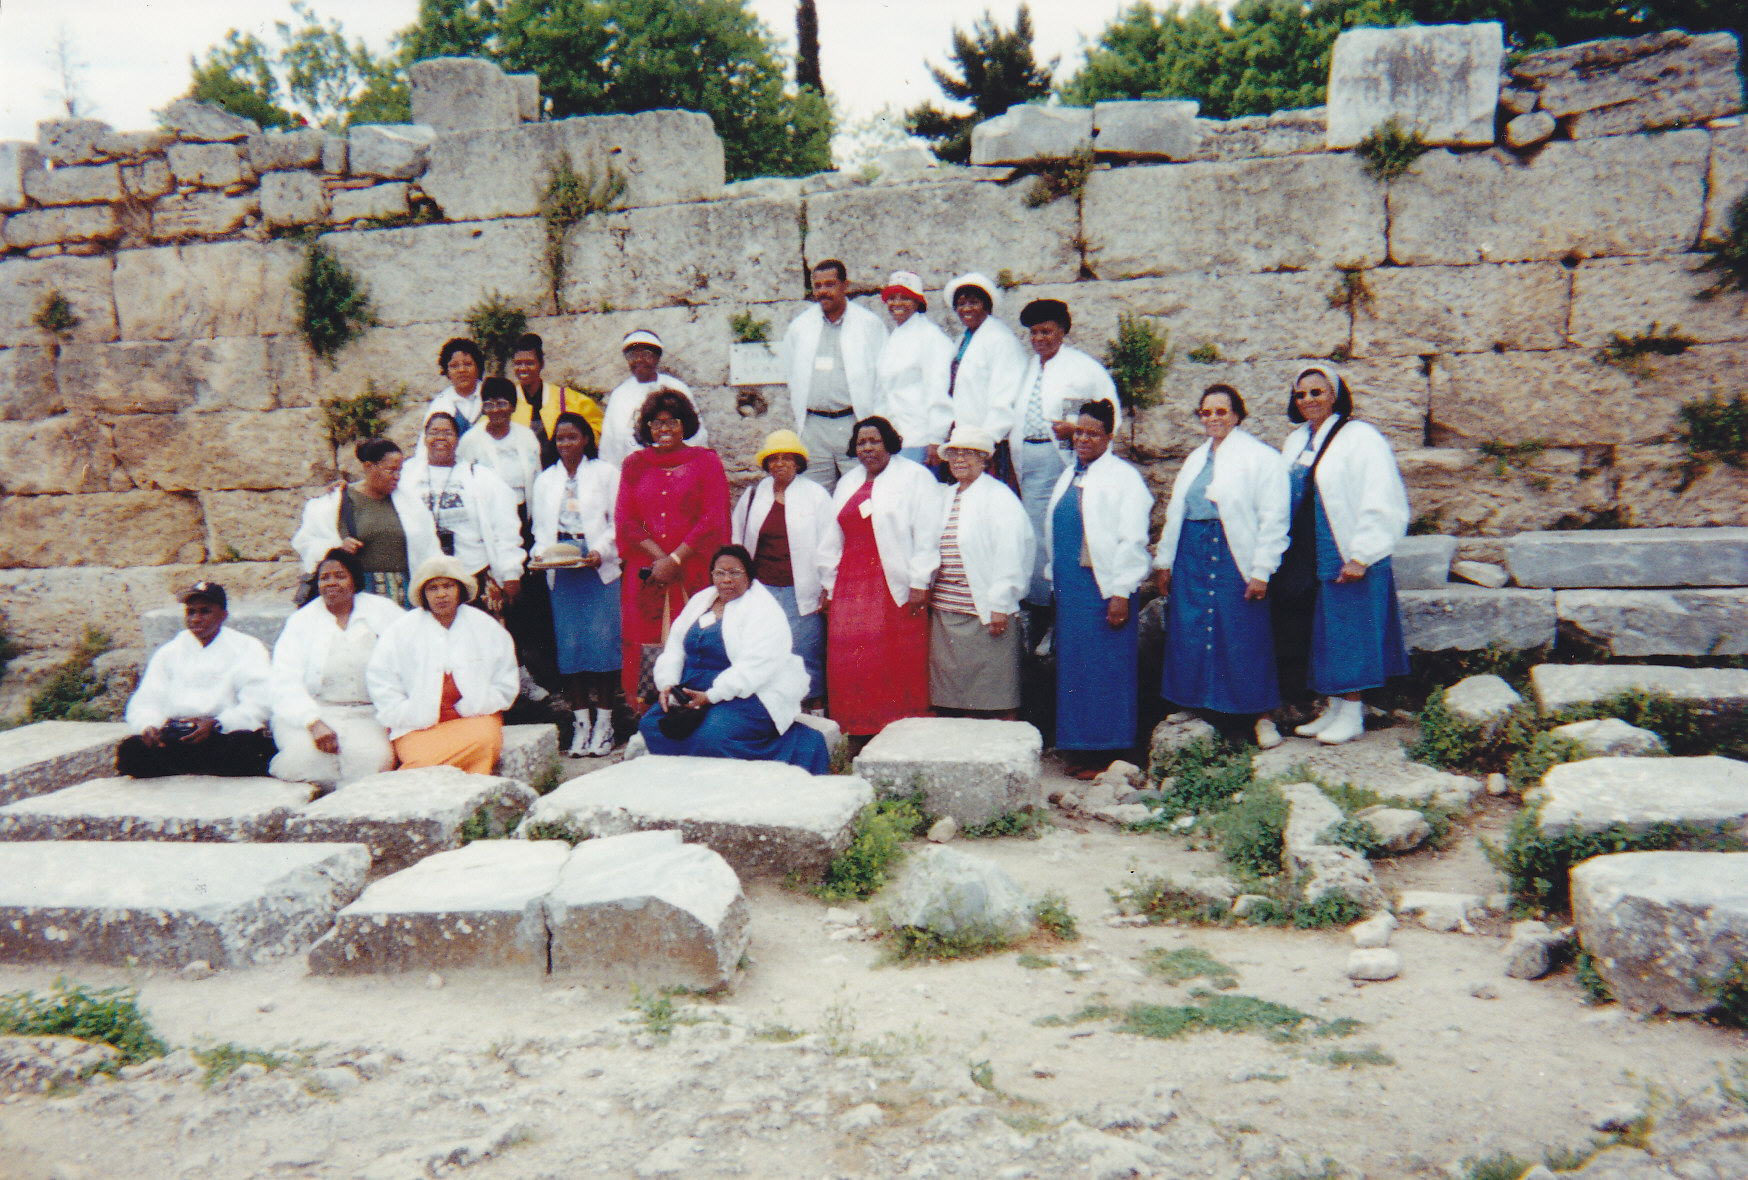 Group Gathered at the Judgment Seat of Paul